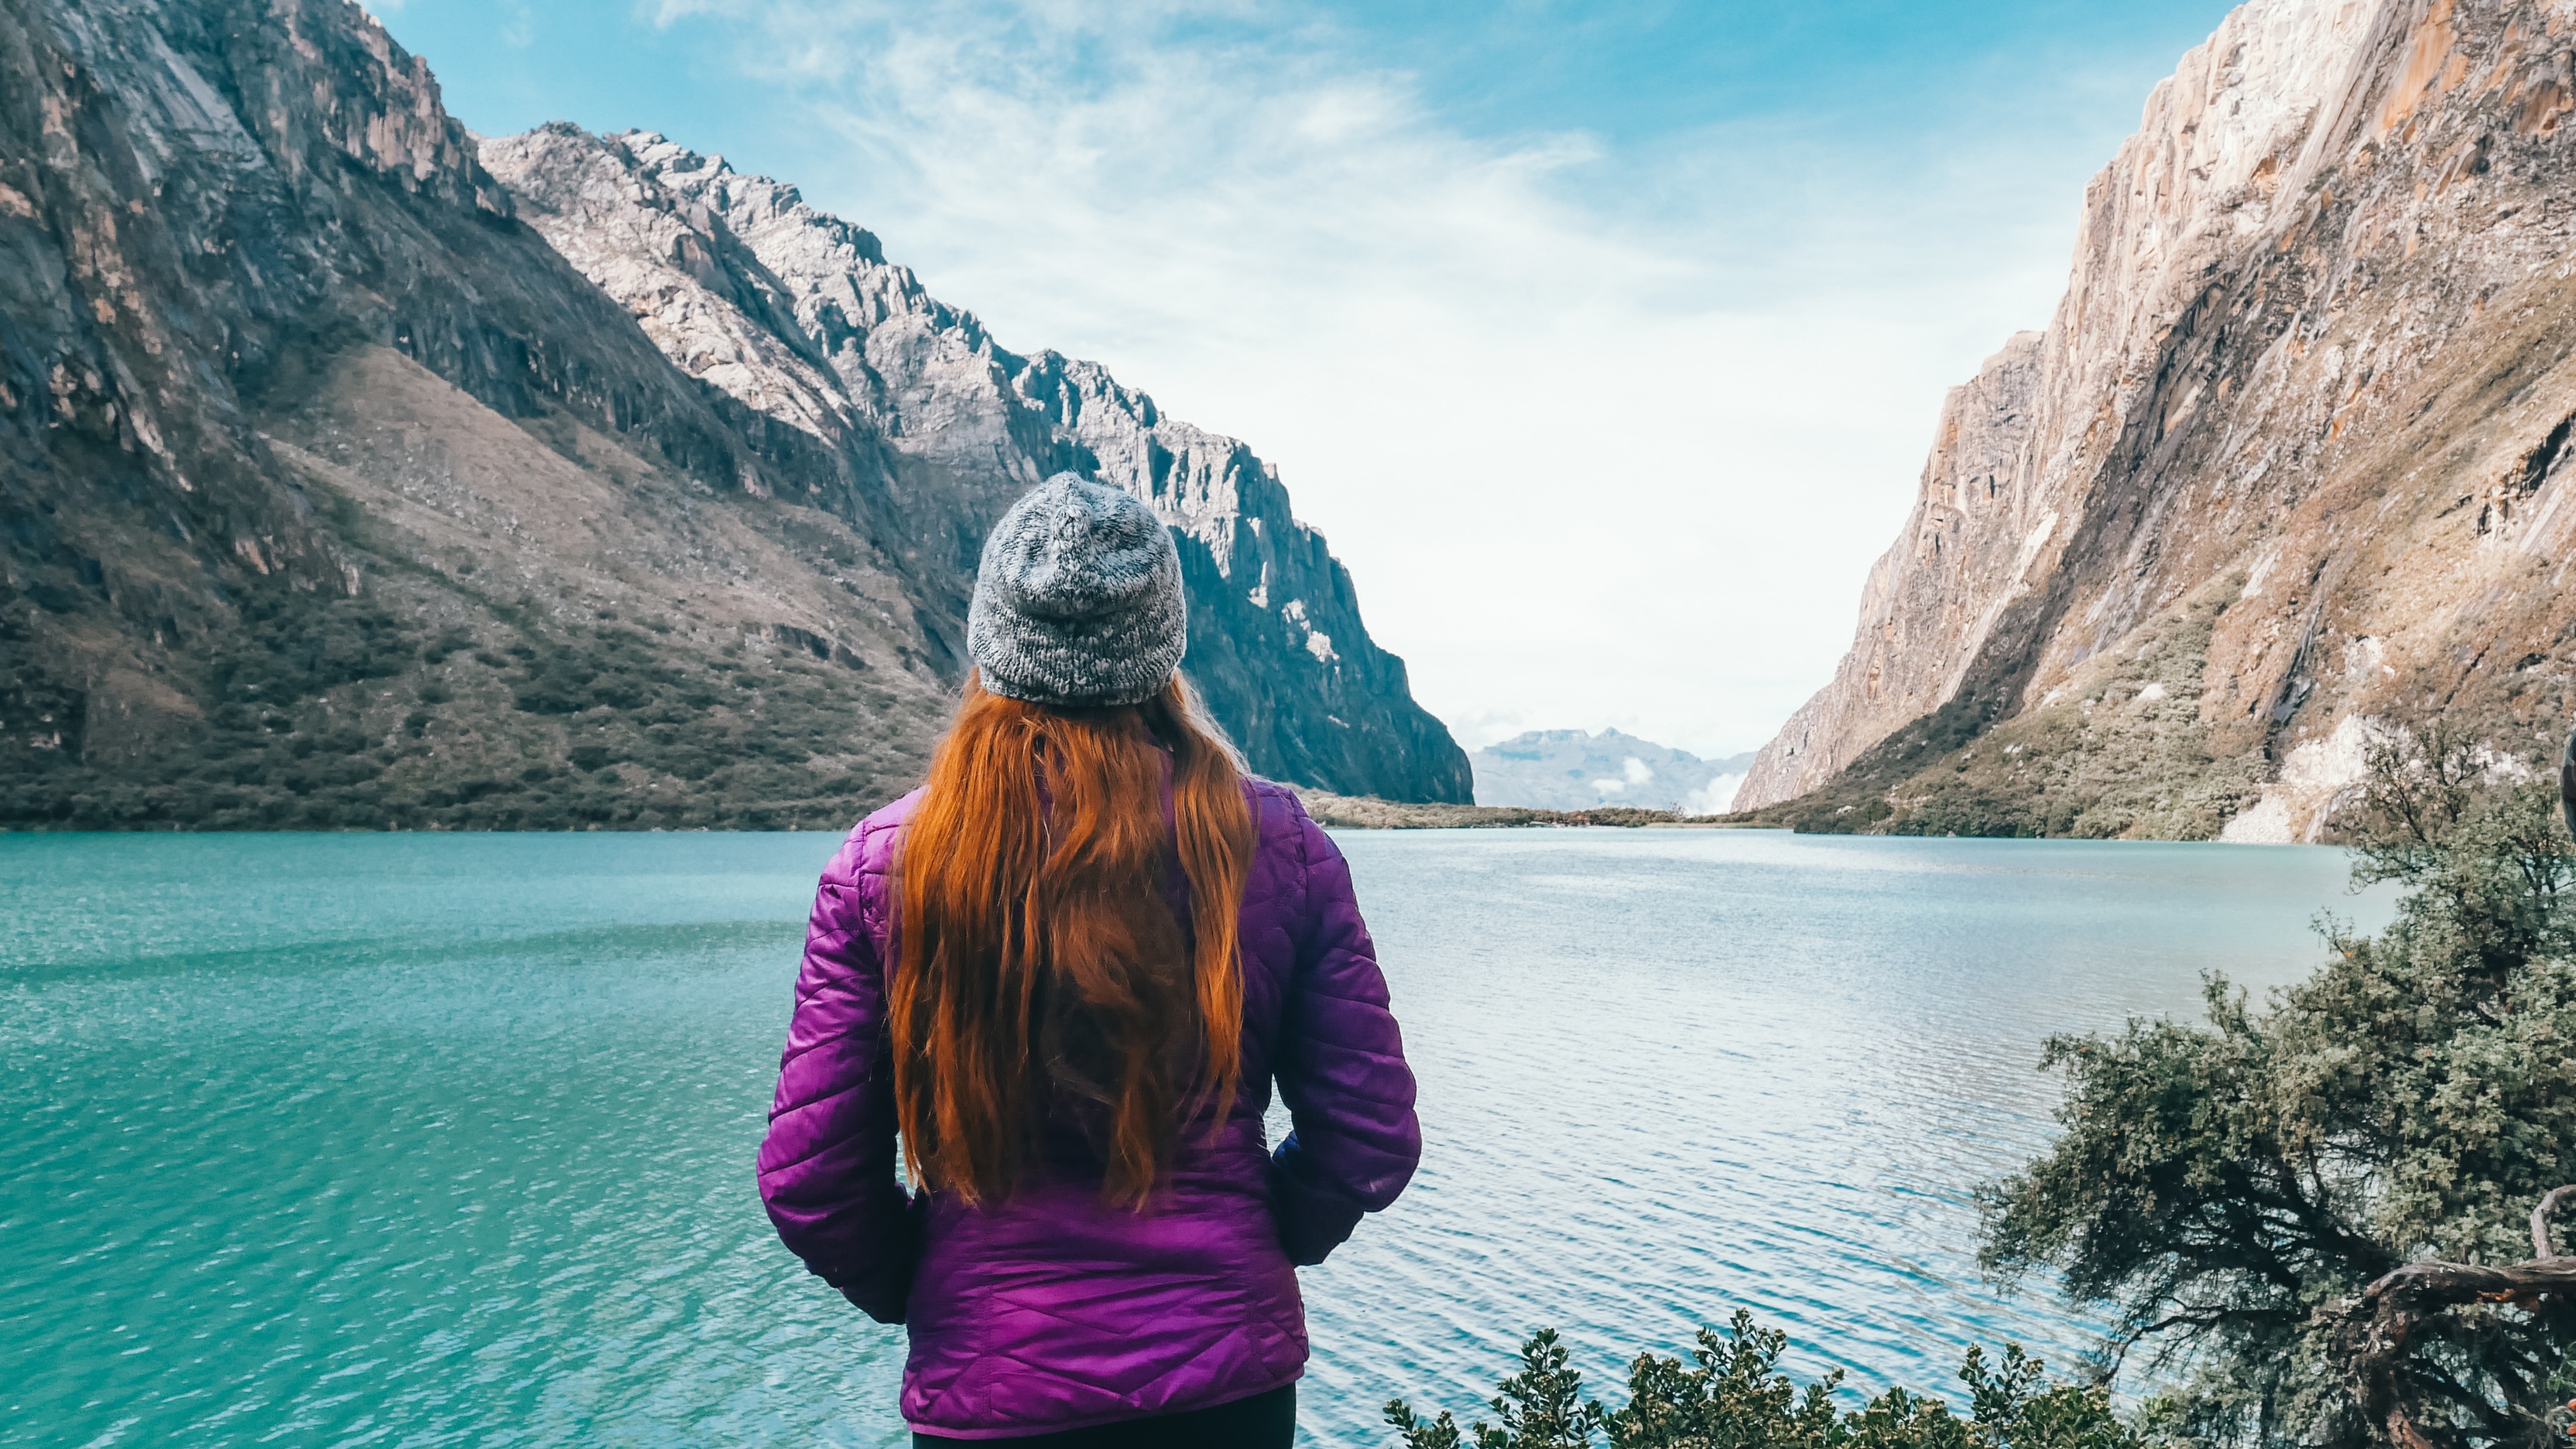 We found some of the most beautiful lakes in the Peruvian Andes near Huaraz.

Quick Tip: Give yourself time to acclimate to the altitude in Huaraz before going on any strenuous hikes.
#peru #travel #adventure